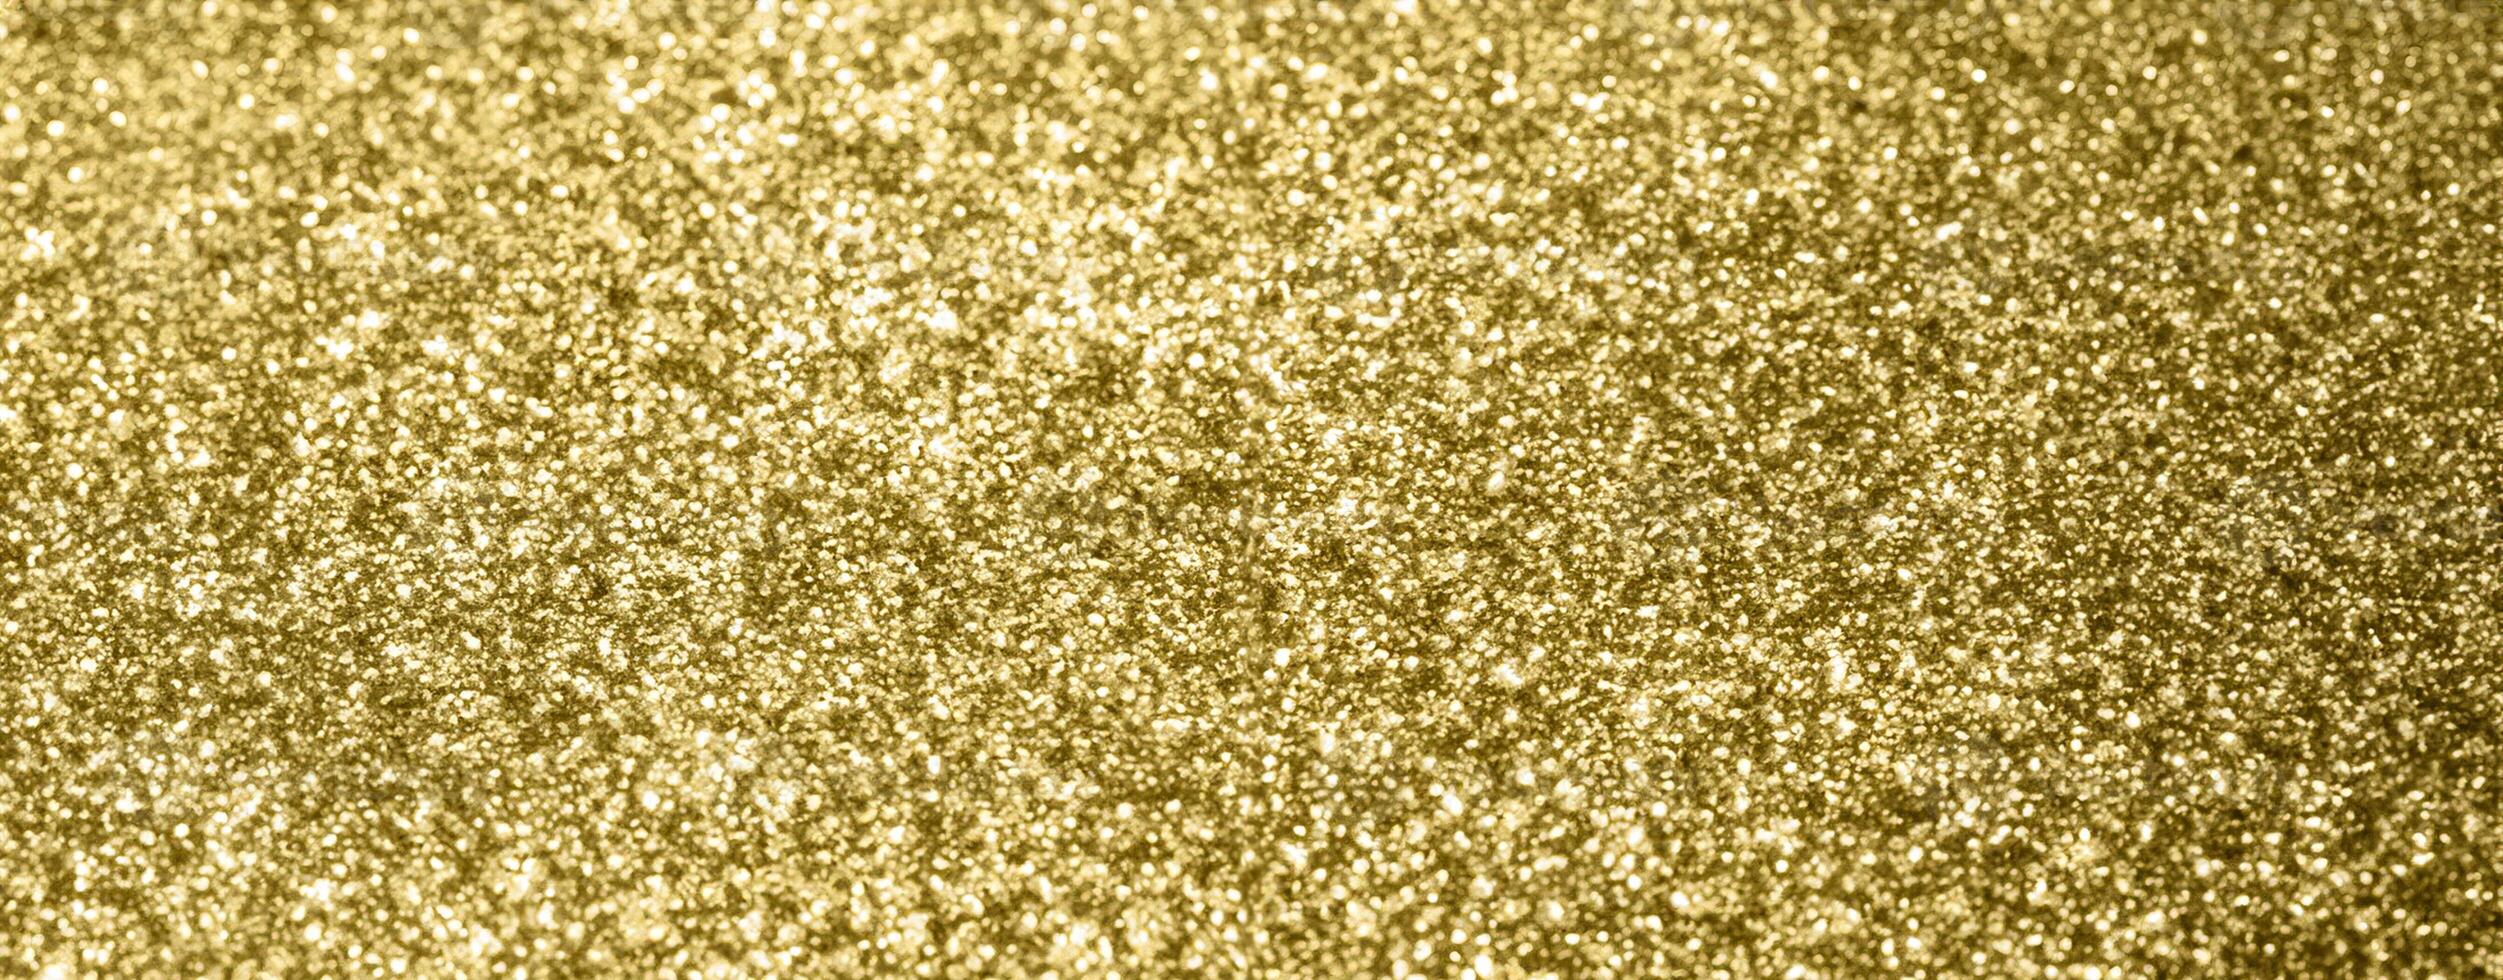 Golden Glitter Sparkle, Abstract Shimmering Background photo